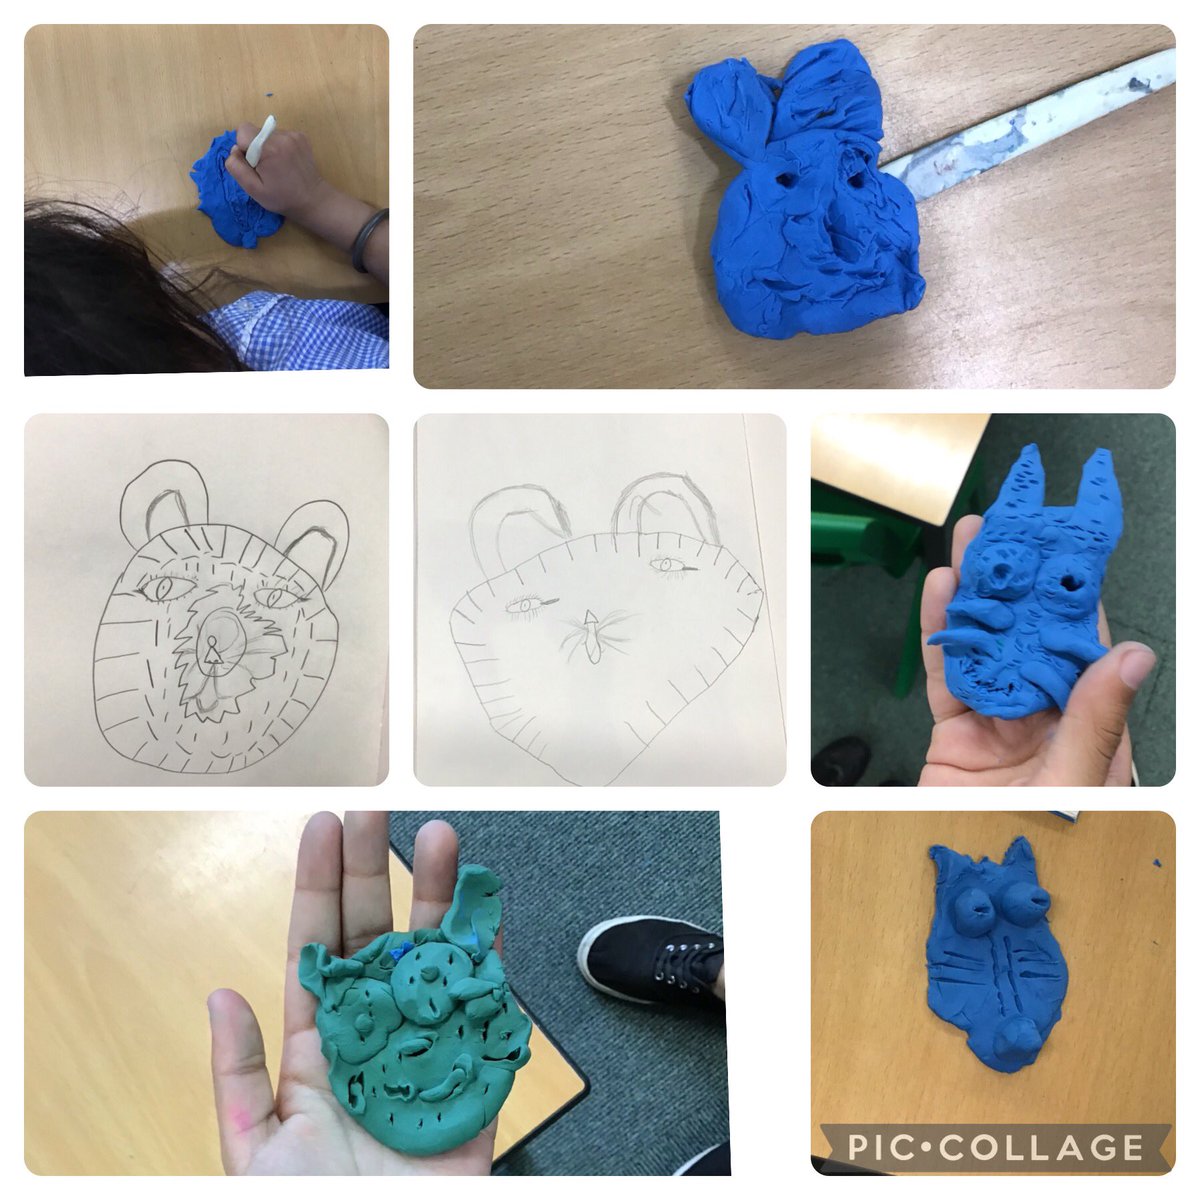 This afternoon, the children really enjoyed planning what animal masks they might make in Art, thinking about the shape and marks that they might make when we use clay to make them. They used the tools to cut and mark the plasticine to practice the skills they would need.